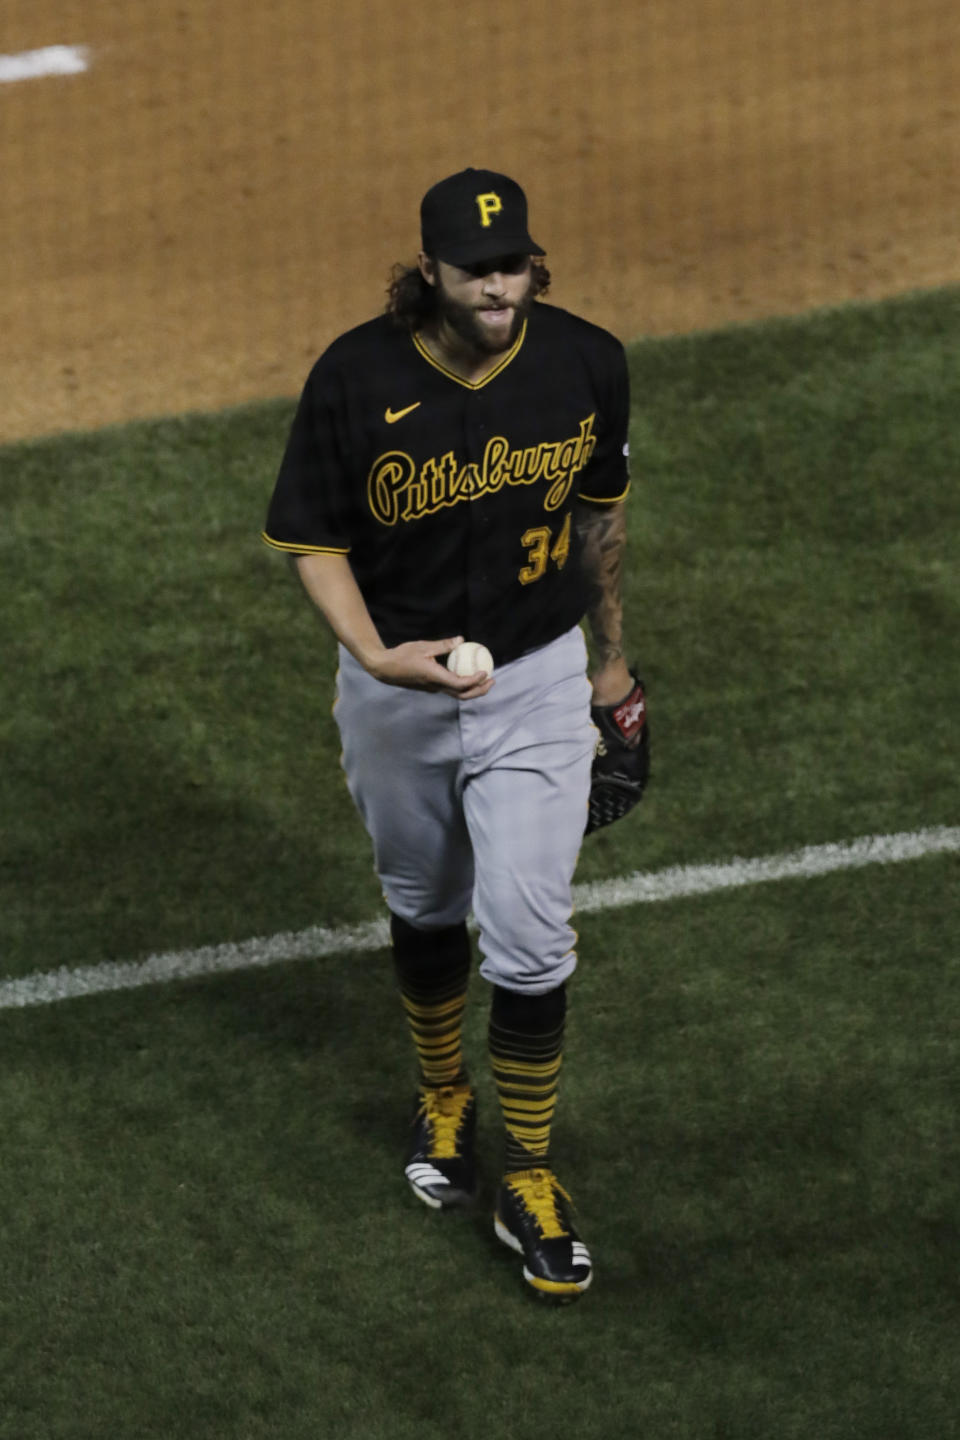 Pittsburgh Pirates starting pitcher Trevor Williams holds the baseball as he walks to the dugout after the fourth inning of a game against the Chicago Cubs in Chicago, Friday, July 31, 2020. (AP Photo/Nam Y. Huh)